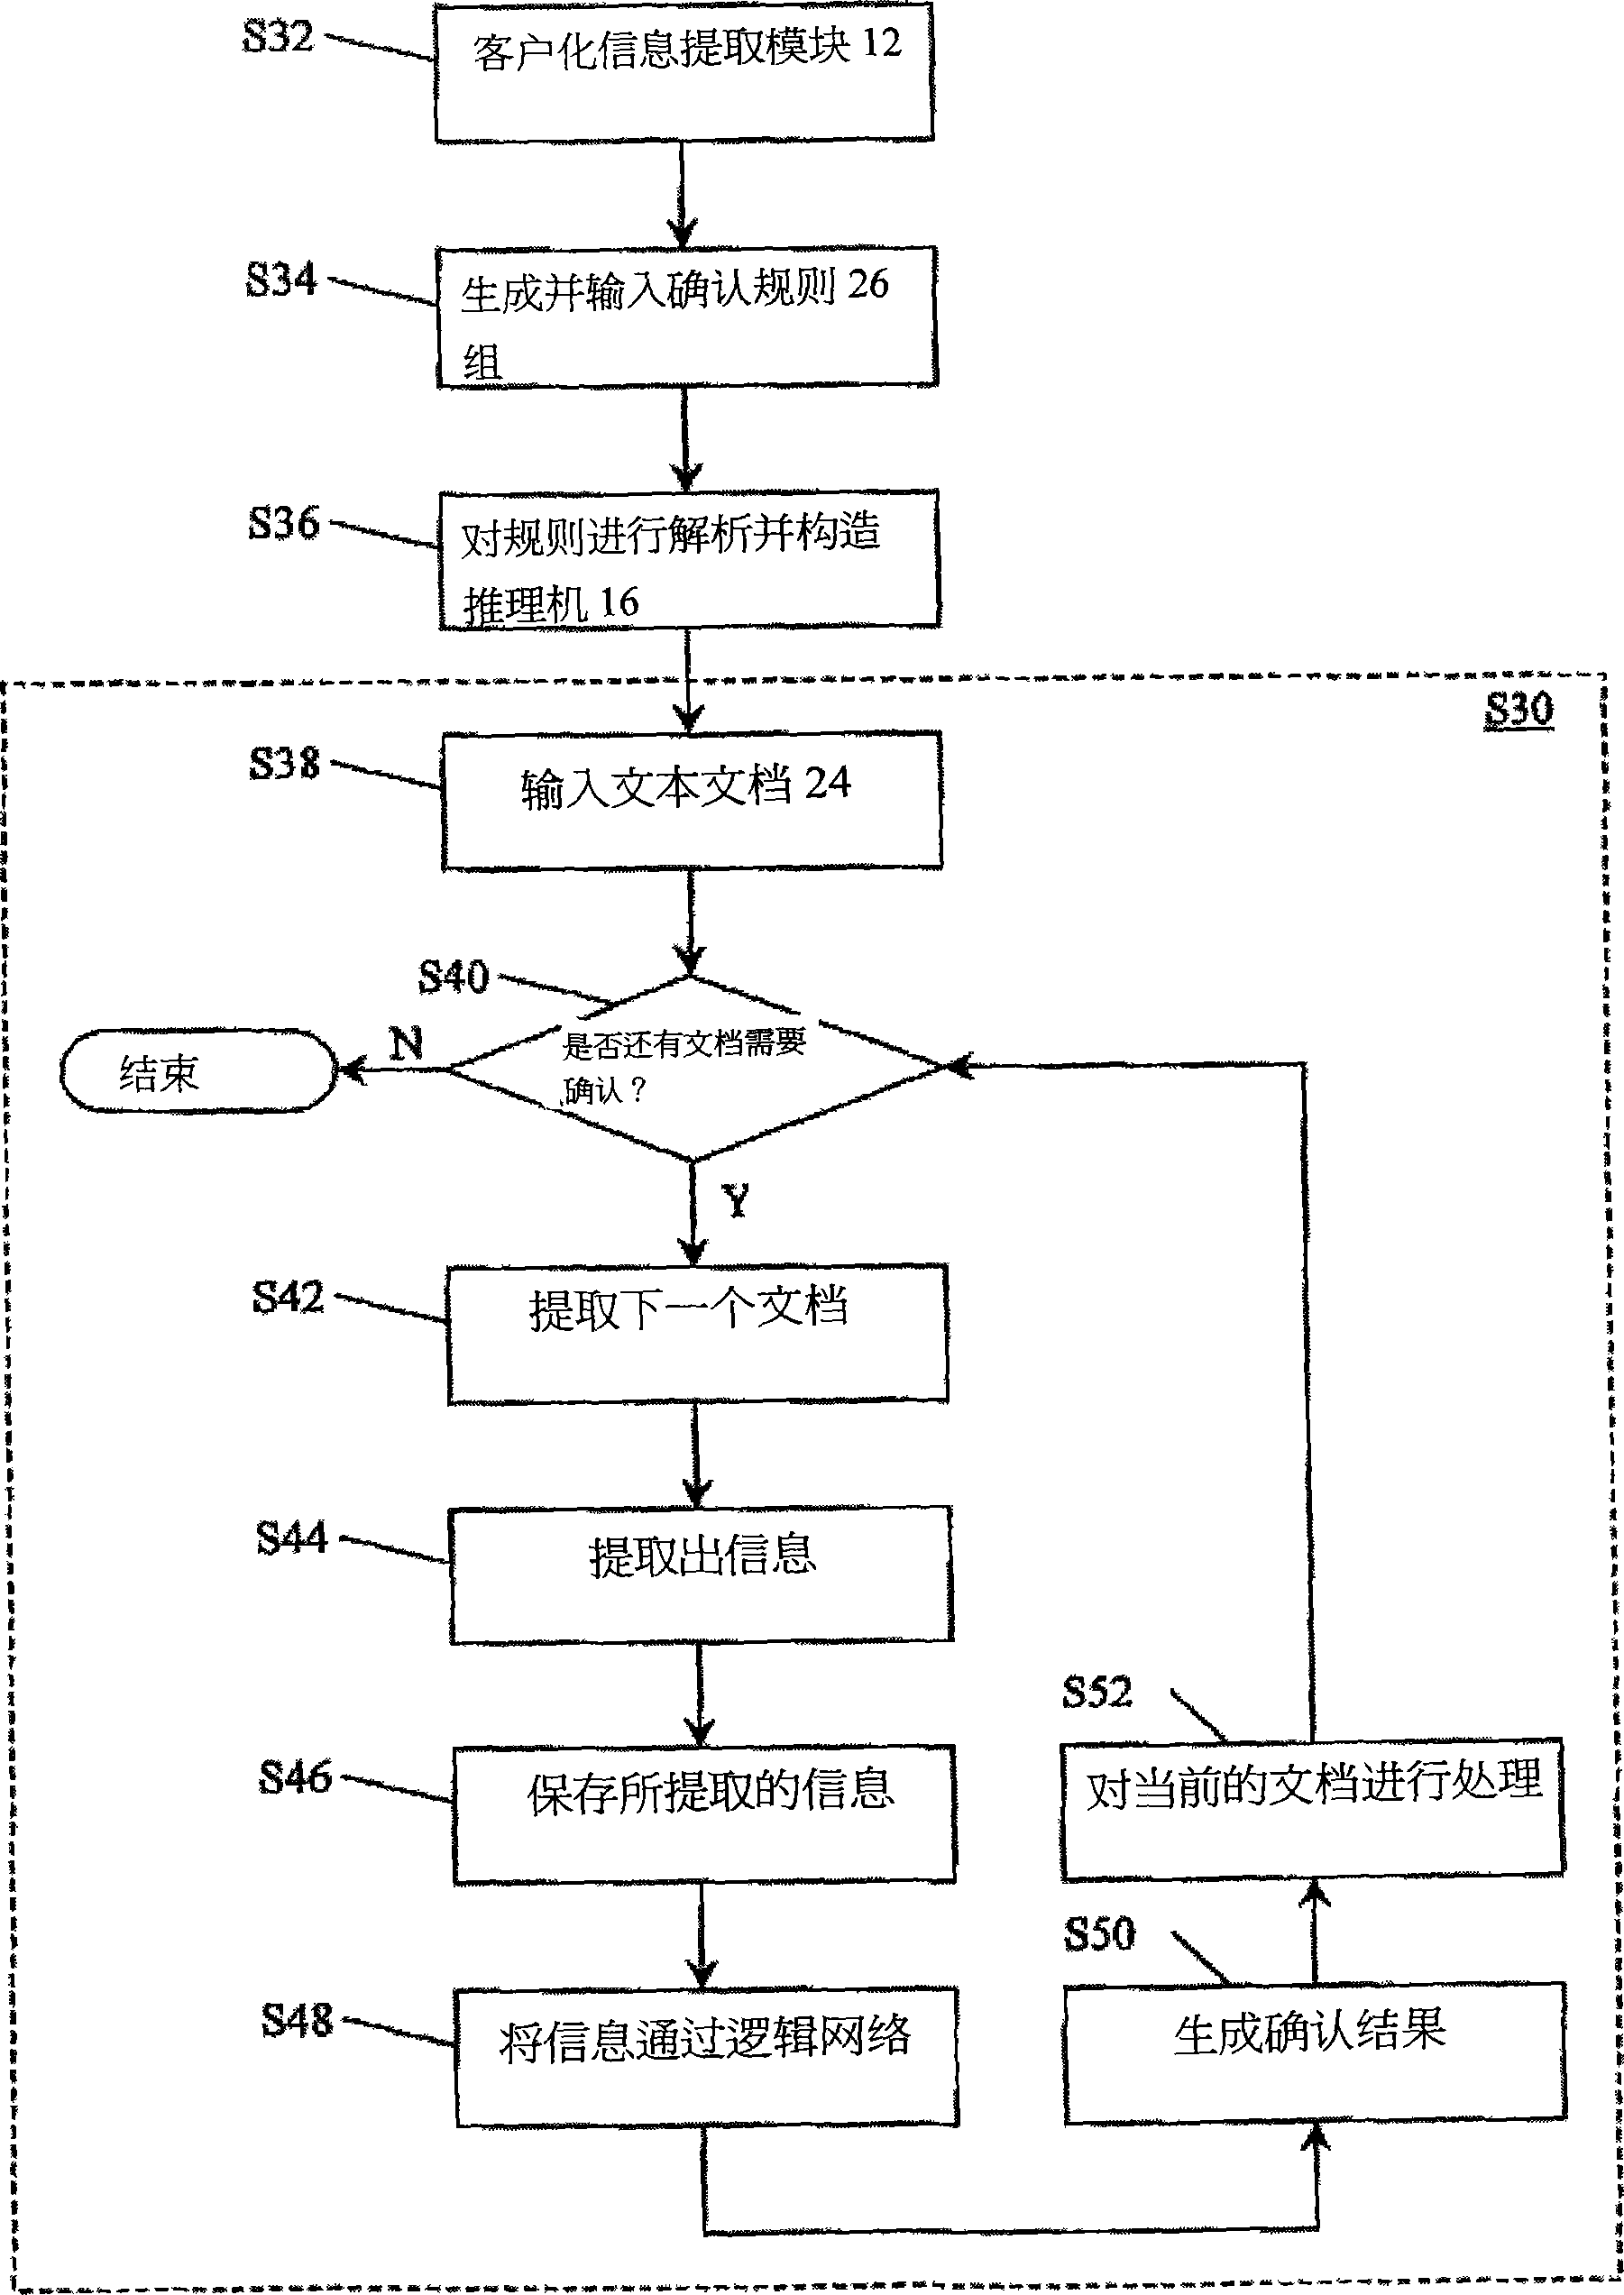 Method and system for validating the content of technical documents